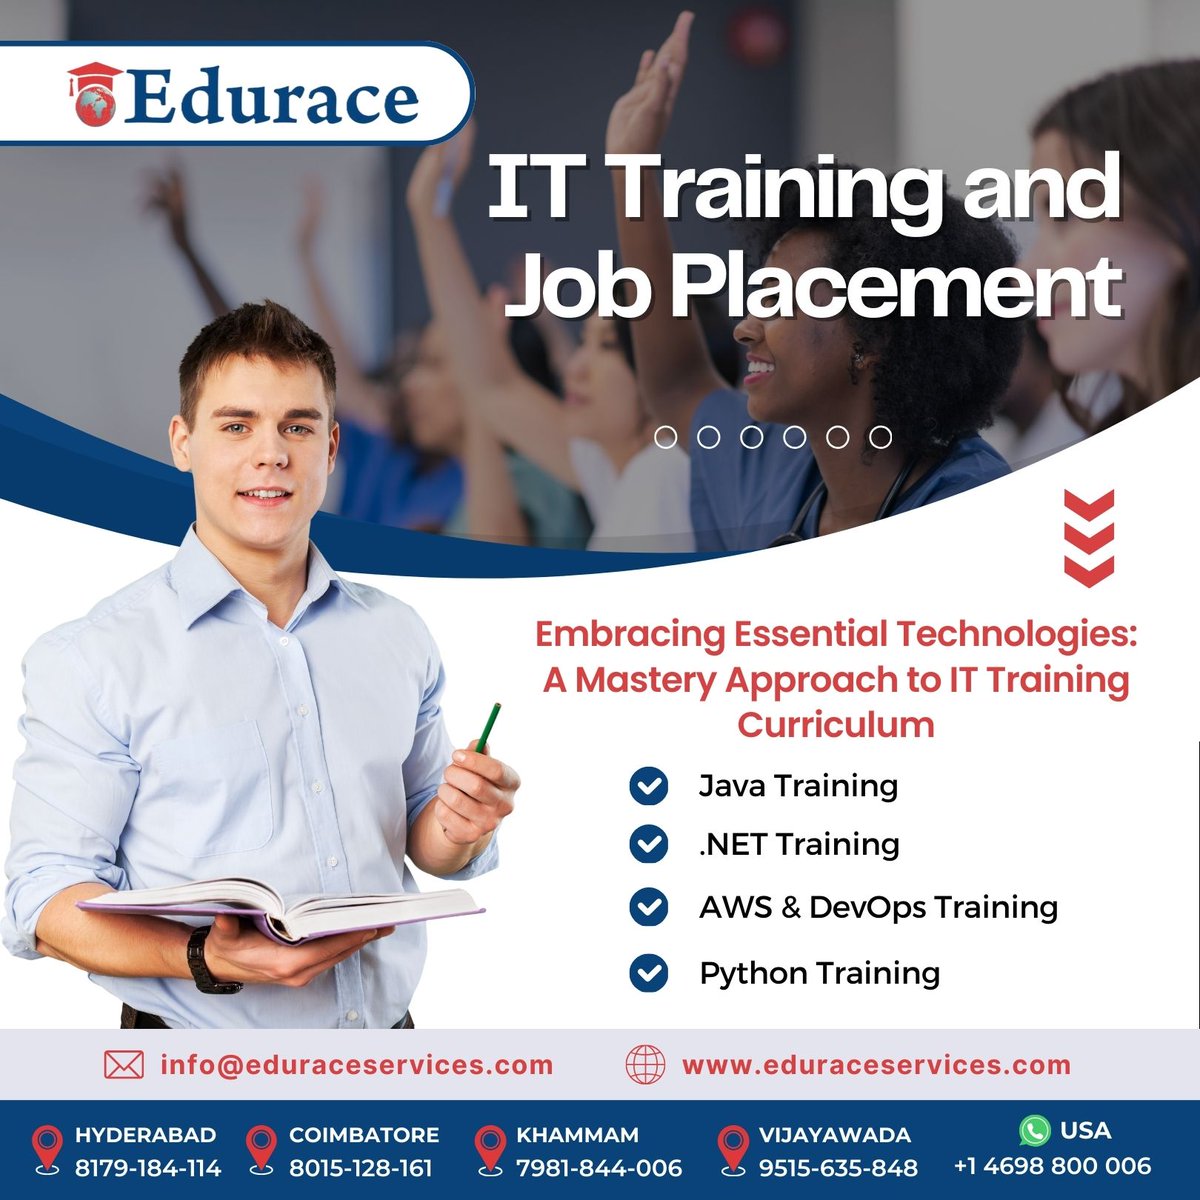 Unlock your potential with our comprehensive IT Training and Job Placement program! 💻🌟 Launch your career in technology Today!

#ITTraining #JobPlacement #TechCareer #ittraining #jobplacement #softwaretraining #traininginstitute #jobassistance #students #eduraceservices